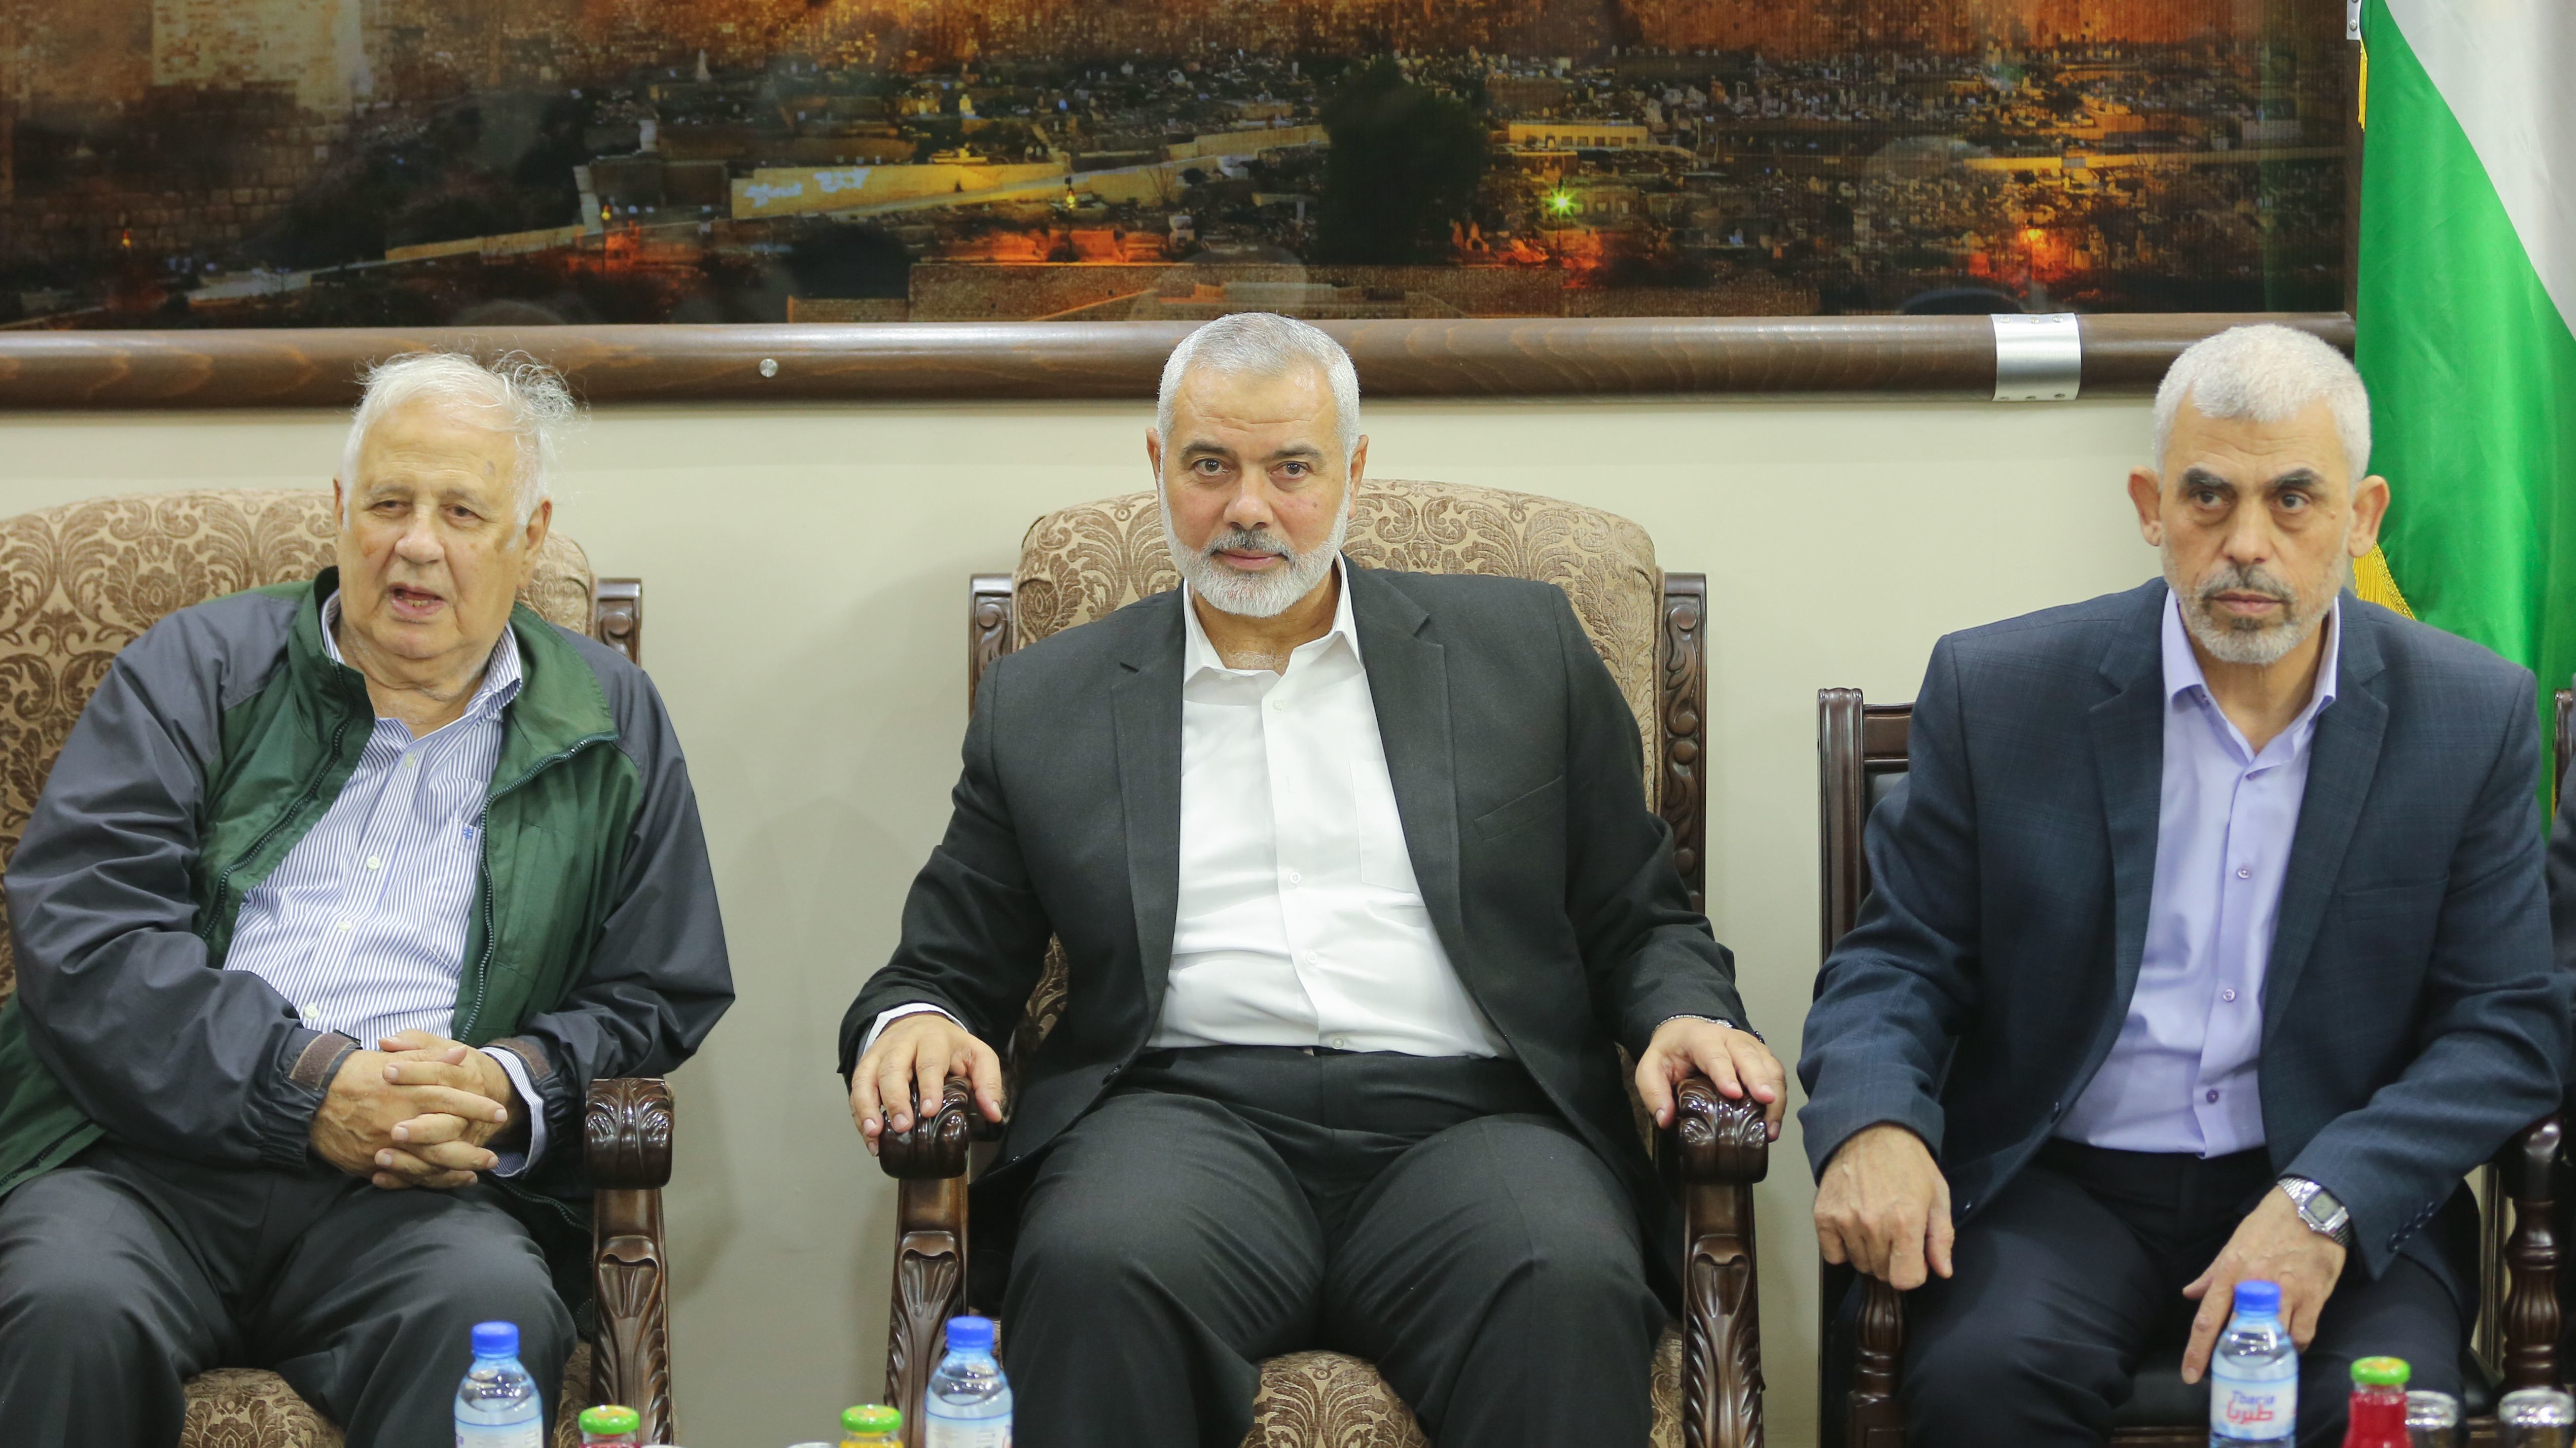 Palestinian Authority and Hamas Calls for Elections Greeted with Skepticism